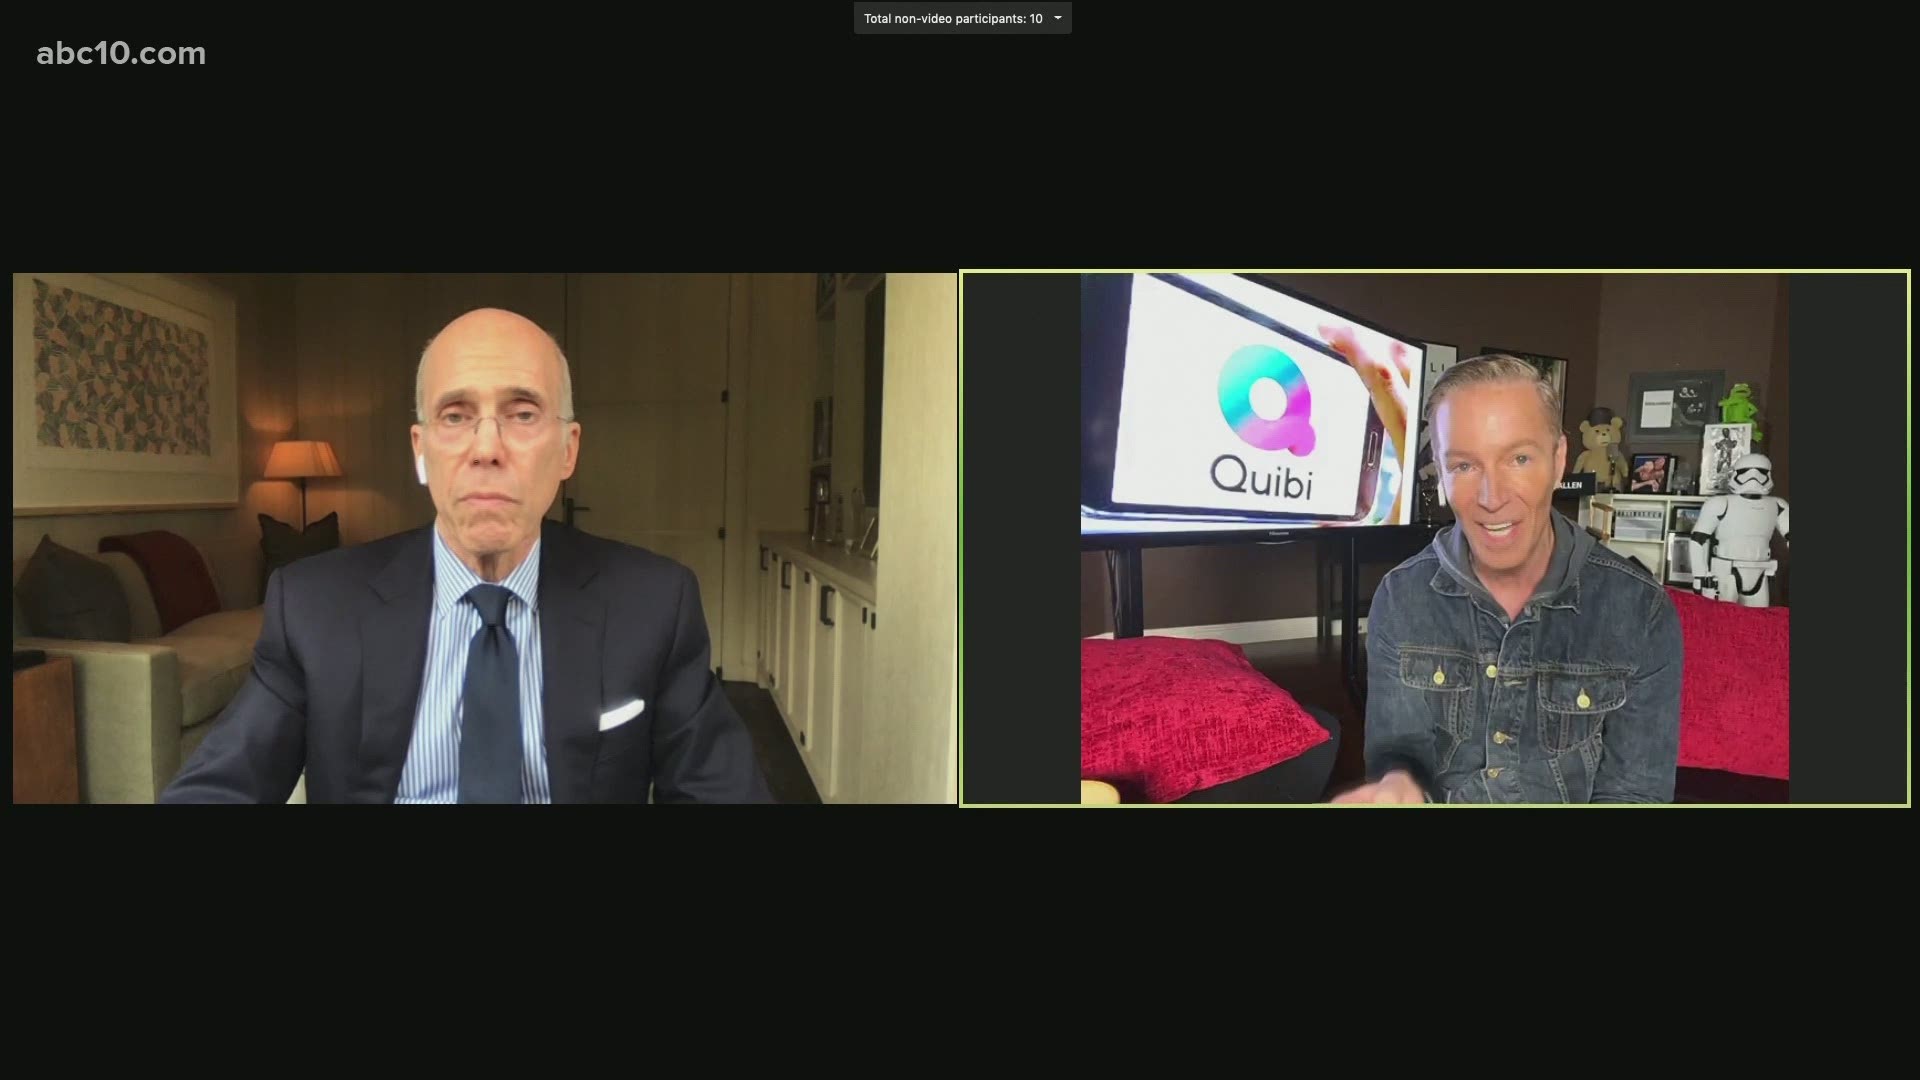 Mark S. Allen speaks with Jeffrey Katzenberg, the creator of the new streaming service Quibi, about the product, celebrities onboard, and more!